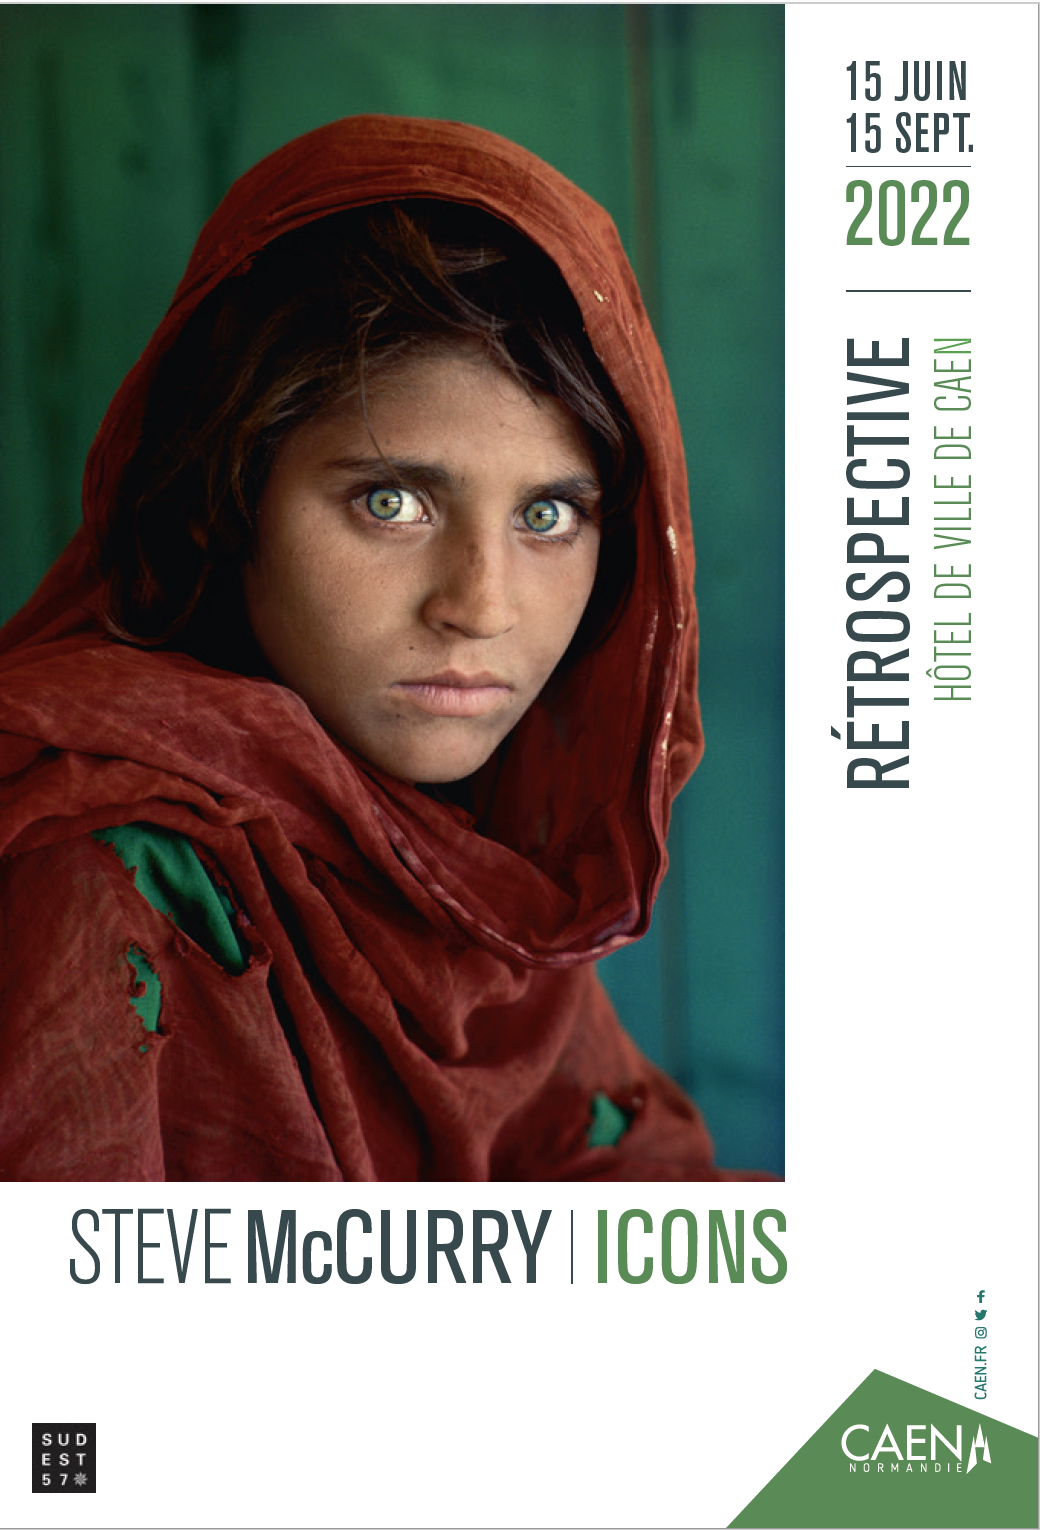 STEVE MCURRY ICONS – ABBAYE-AUX-HOMMES – CAEN